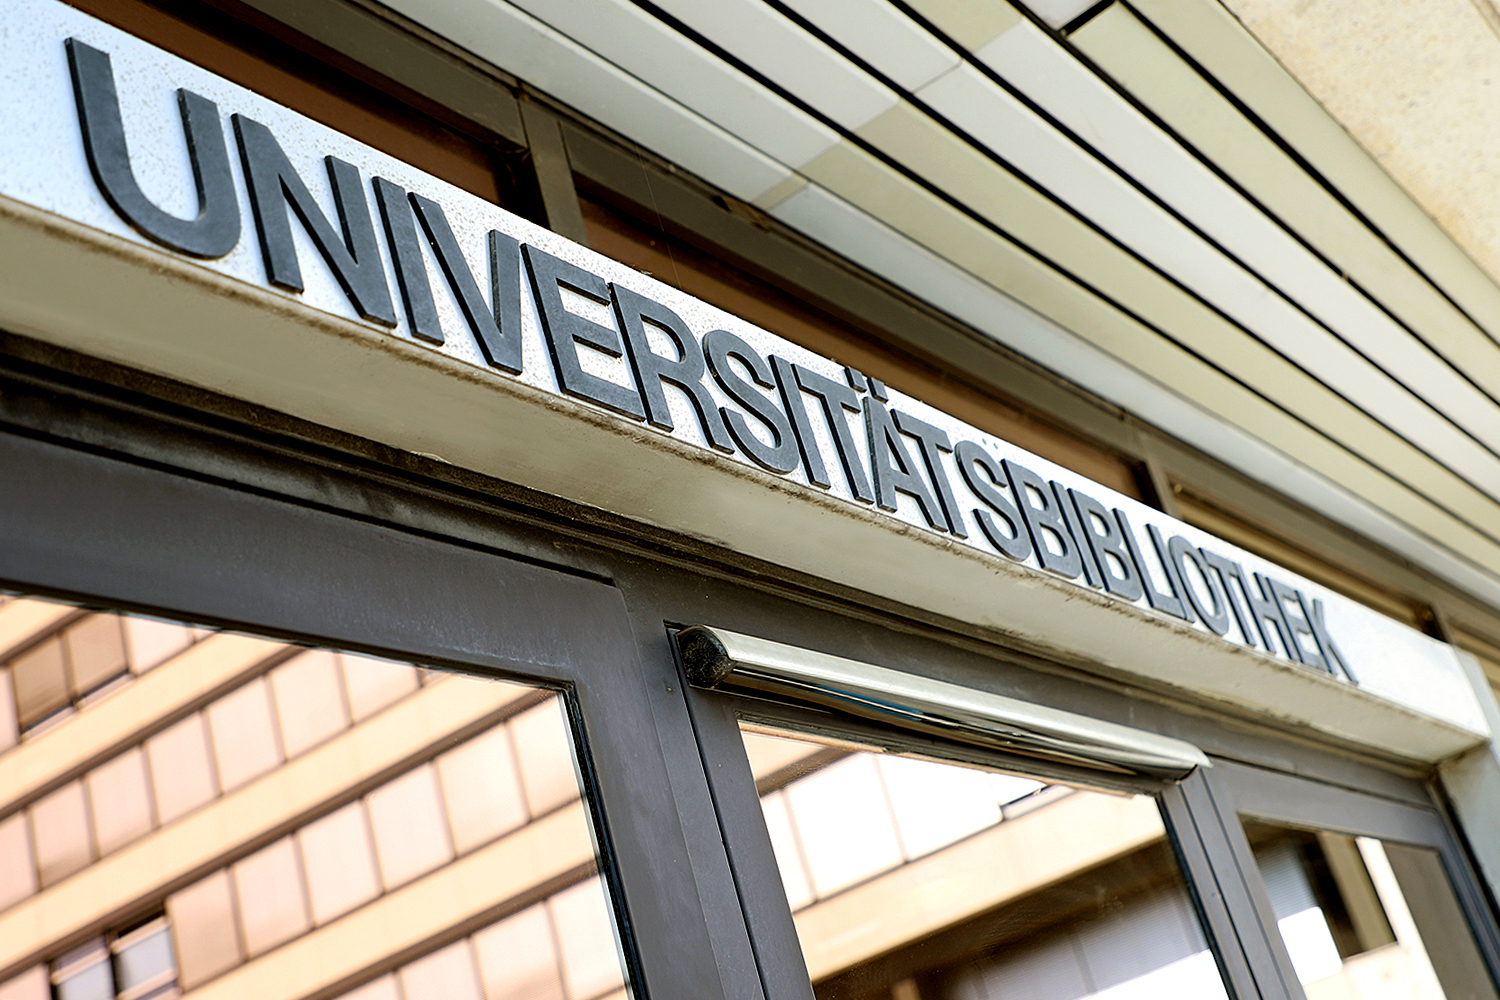 University Library lettering over the main entrance